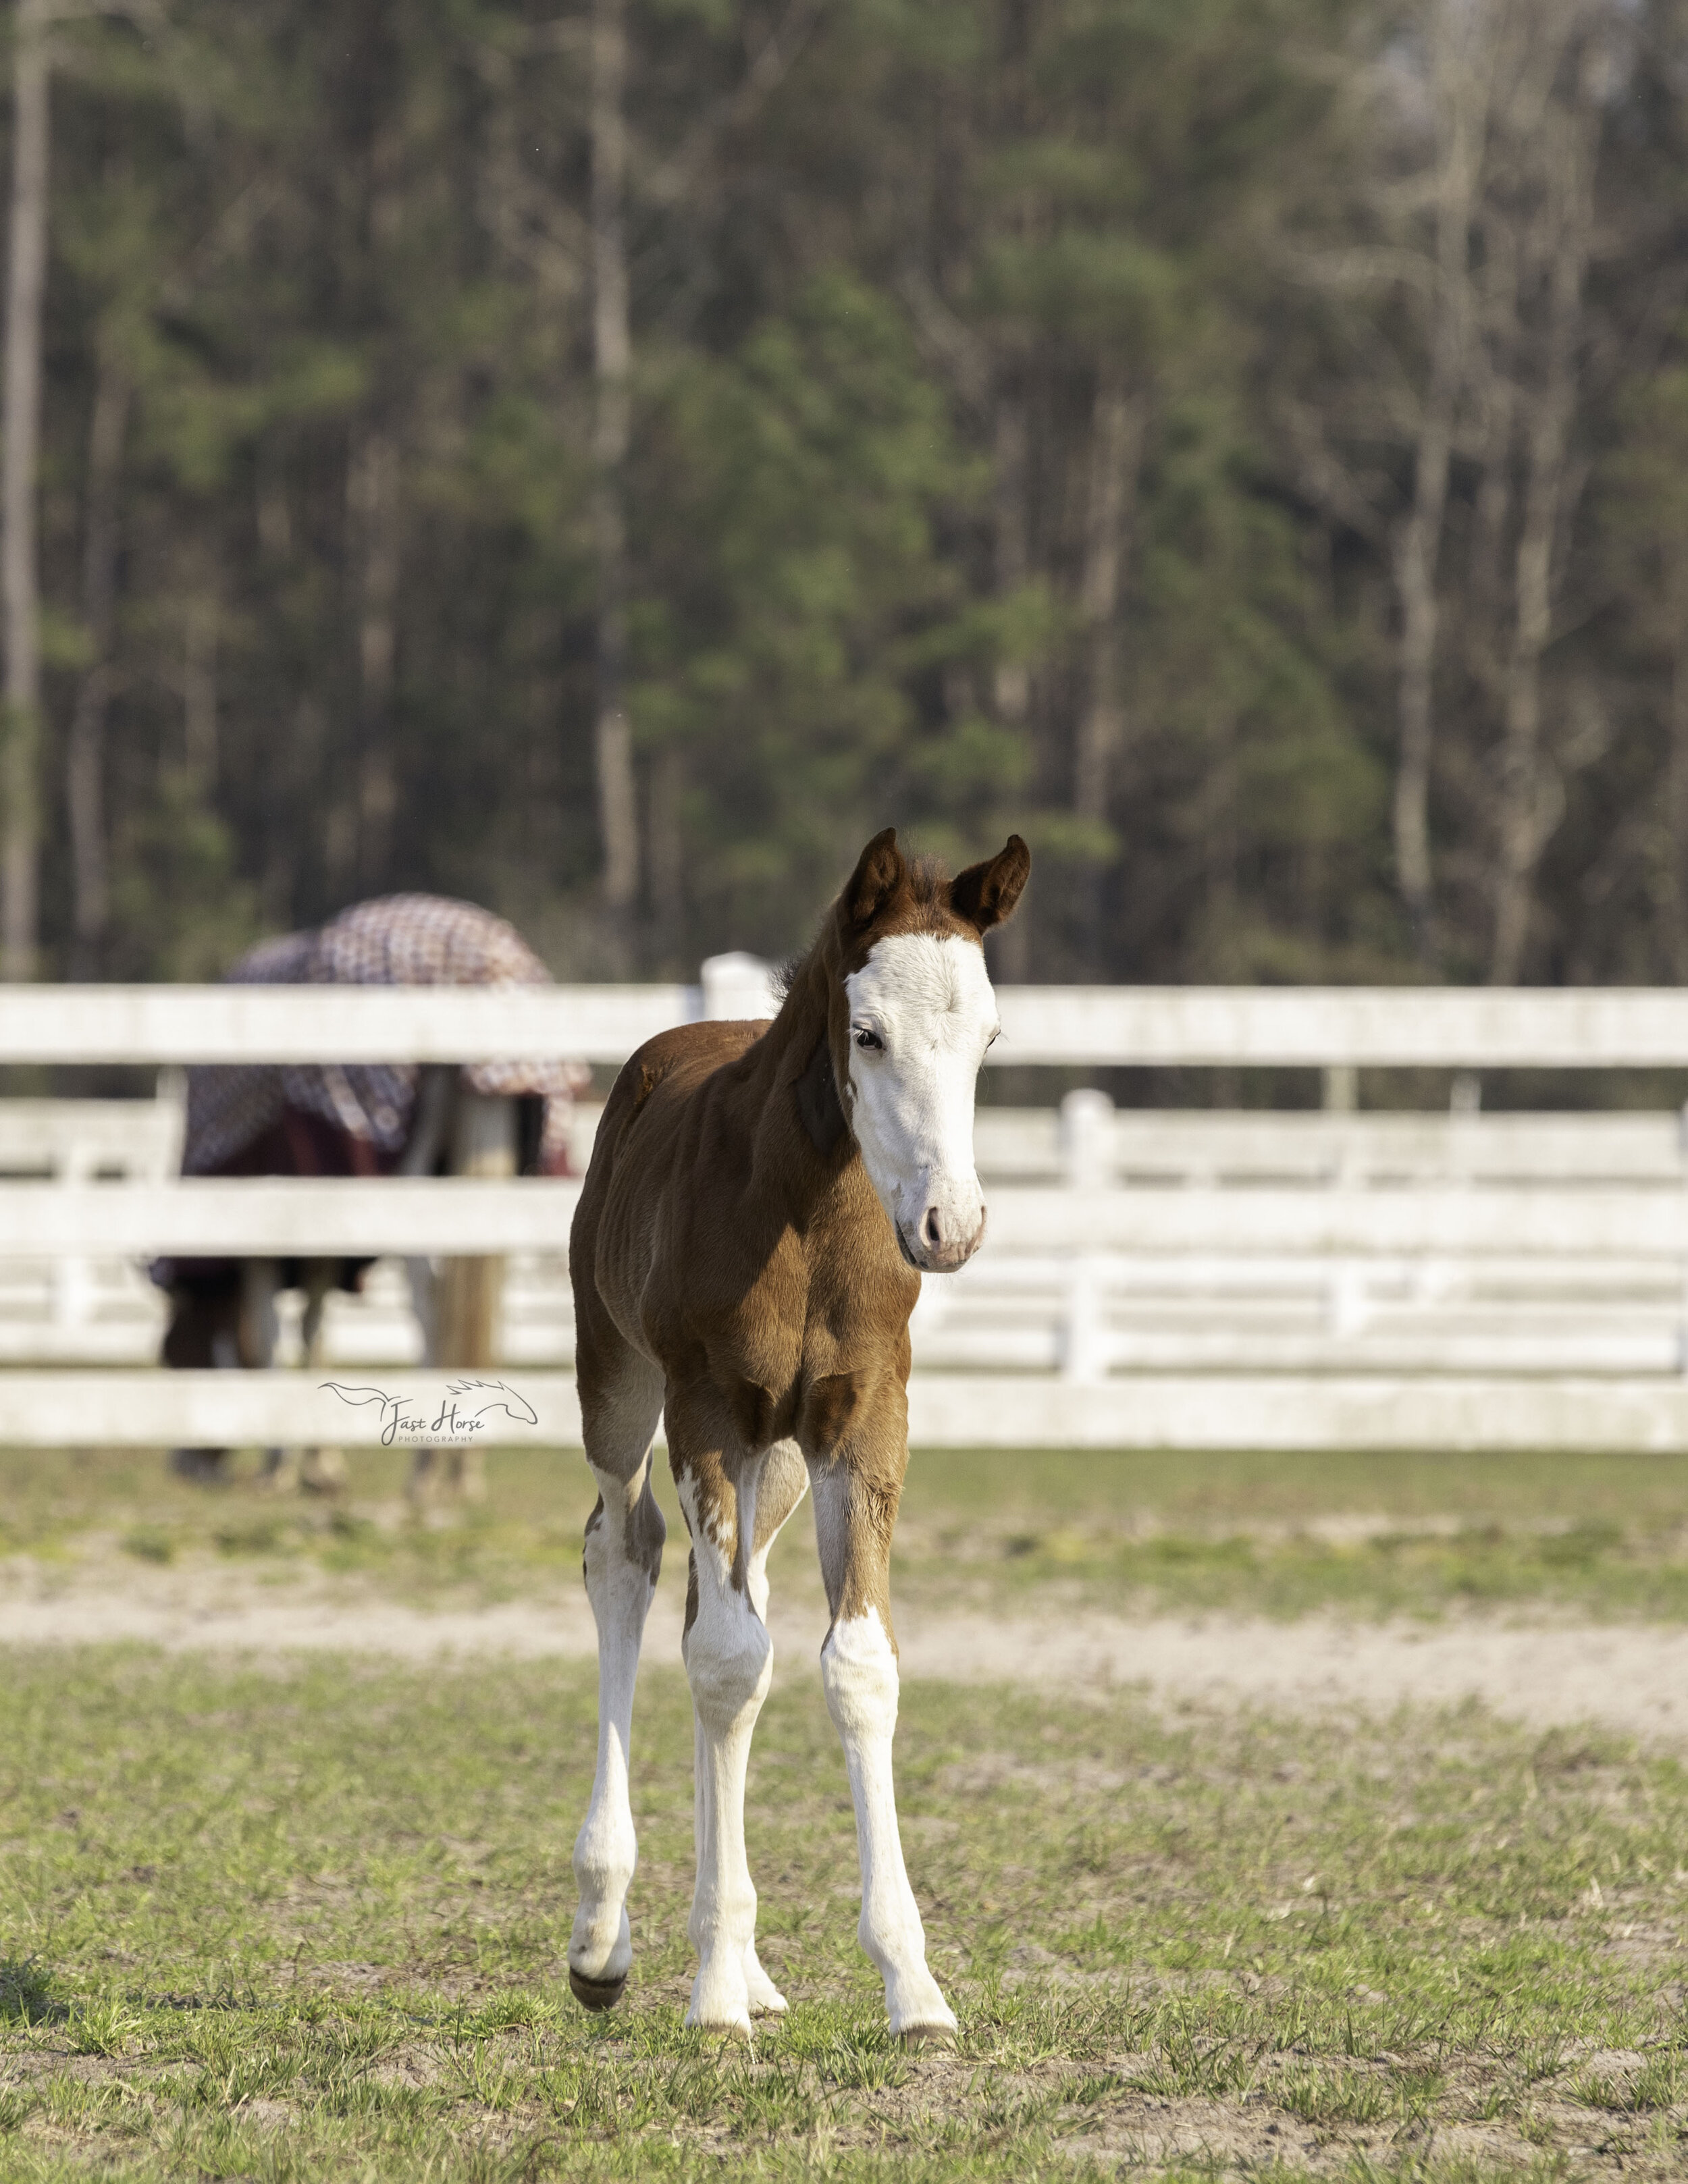 APHA_Foal_Colt_Florida_Fast Horse Photography_7.jpg